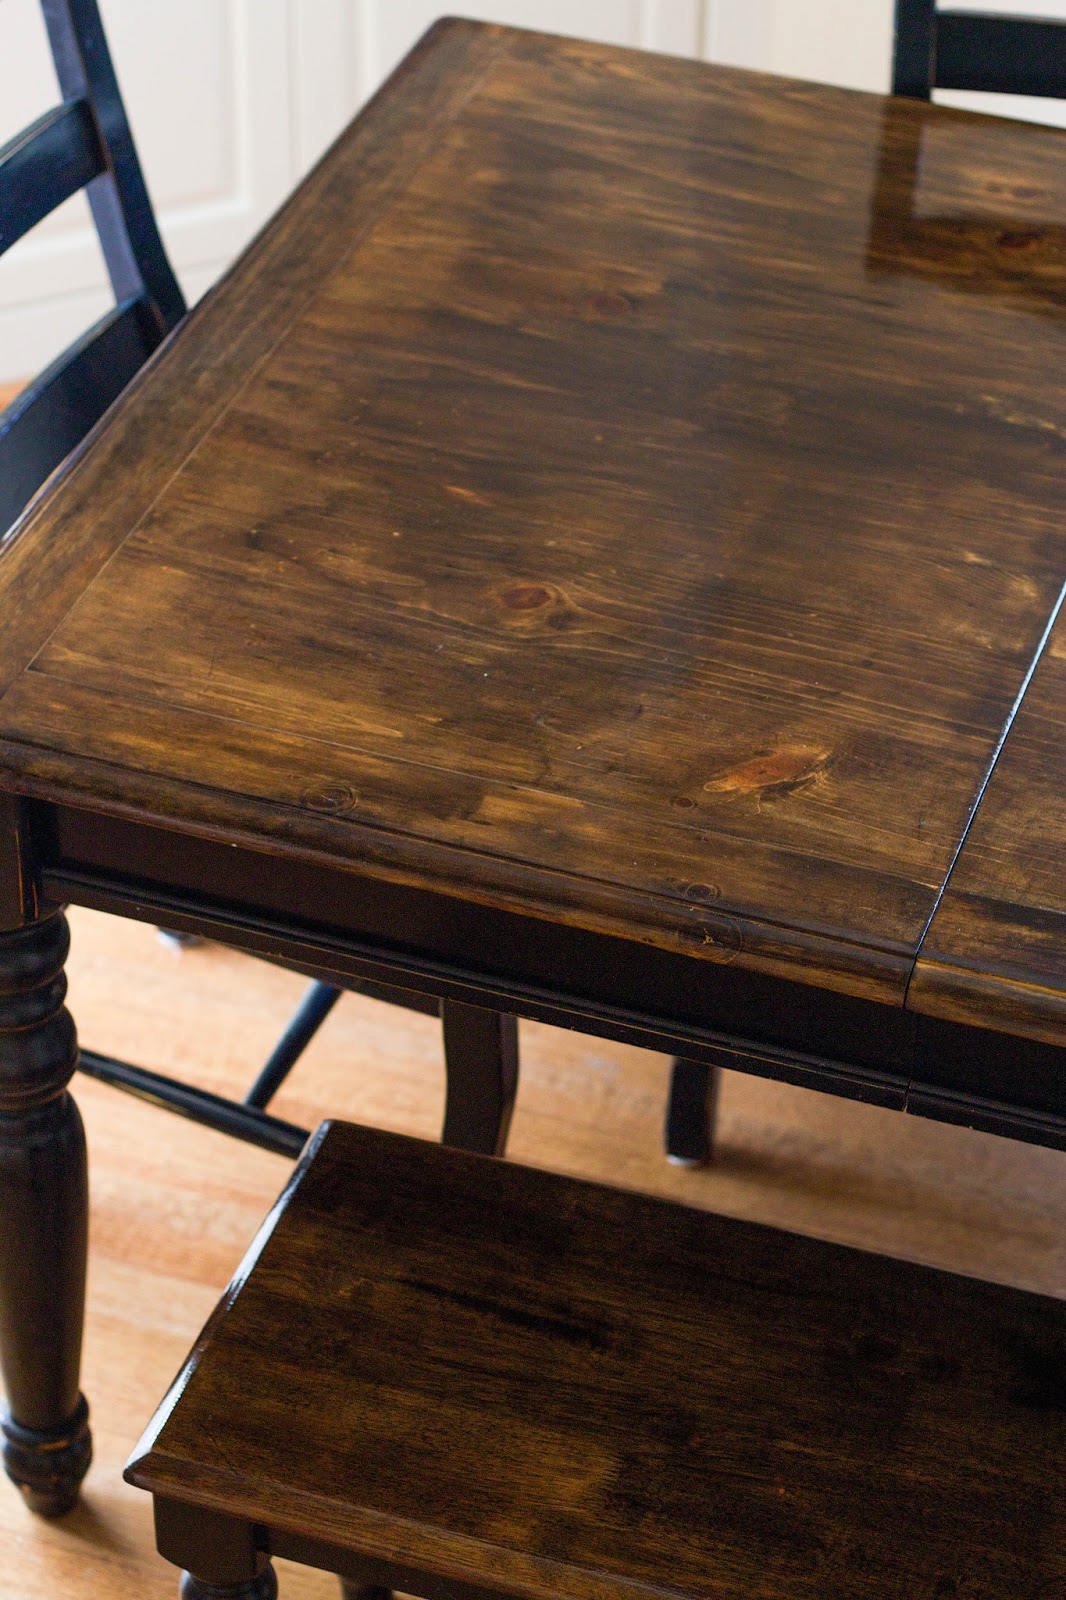 do it yourself divas: diy: refinish just a table top and